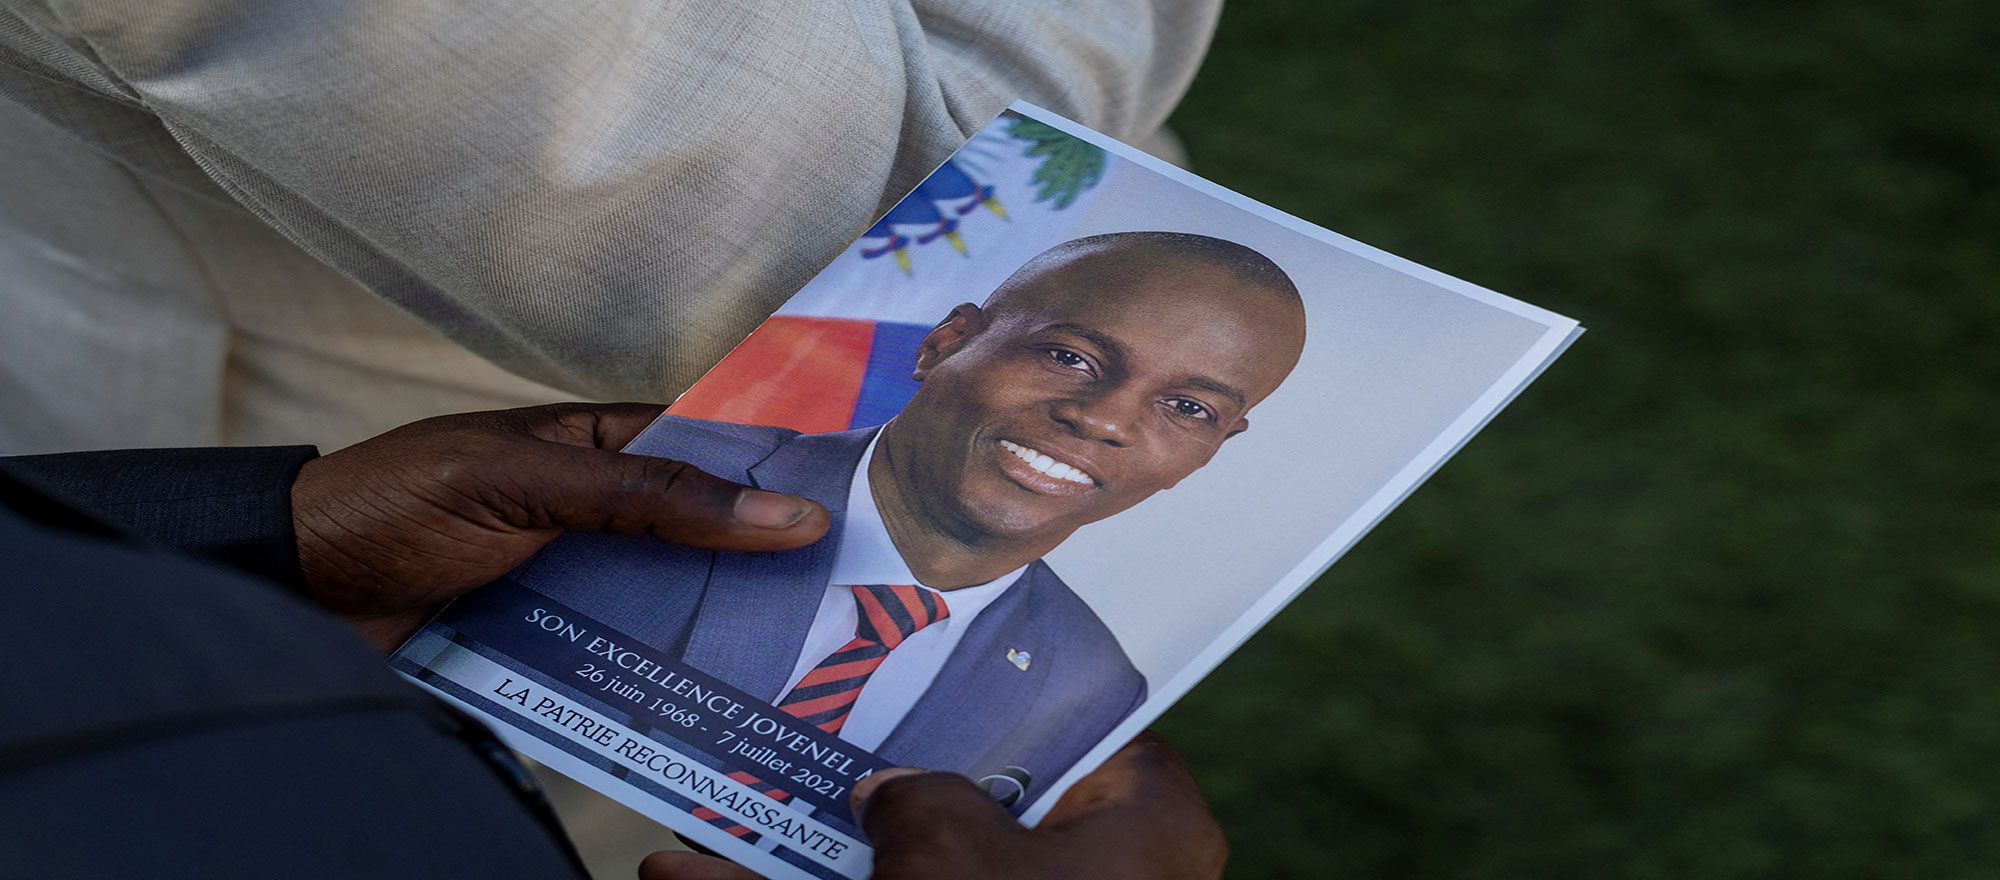 Ex Dea Informant Pleads Guilty To Role In Killing Haitian President English Version